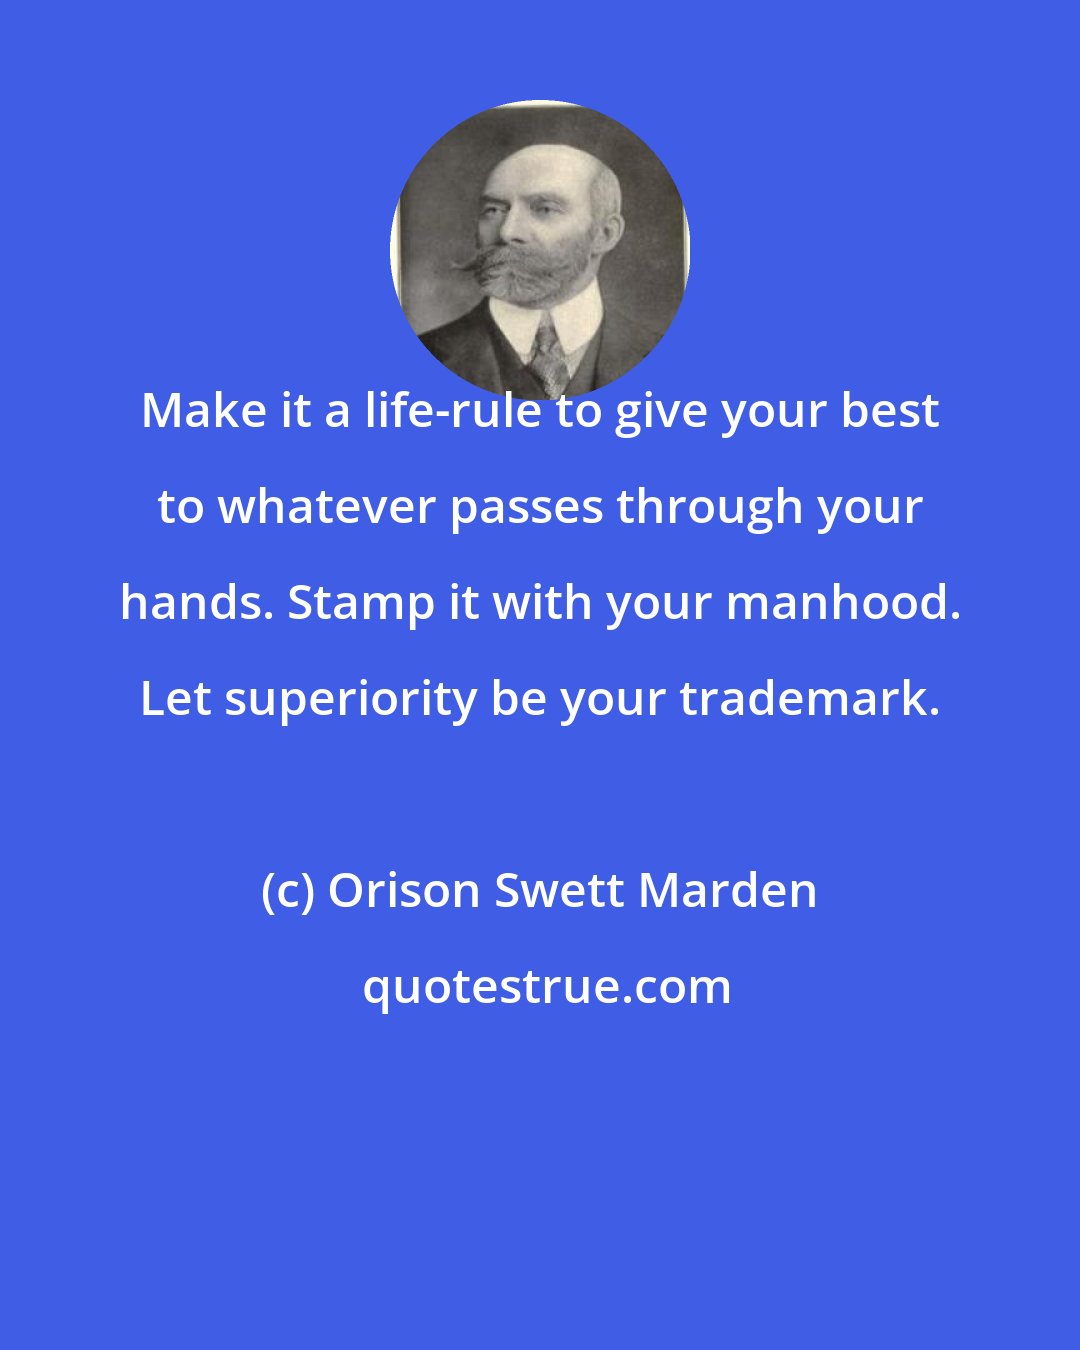 Orison Swett Marden: Make it a life-rule to give your best to whatever passes through your hands. Stamp it with your manhood. Let superiority be your trademark.